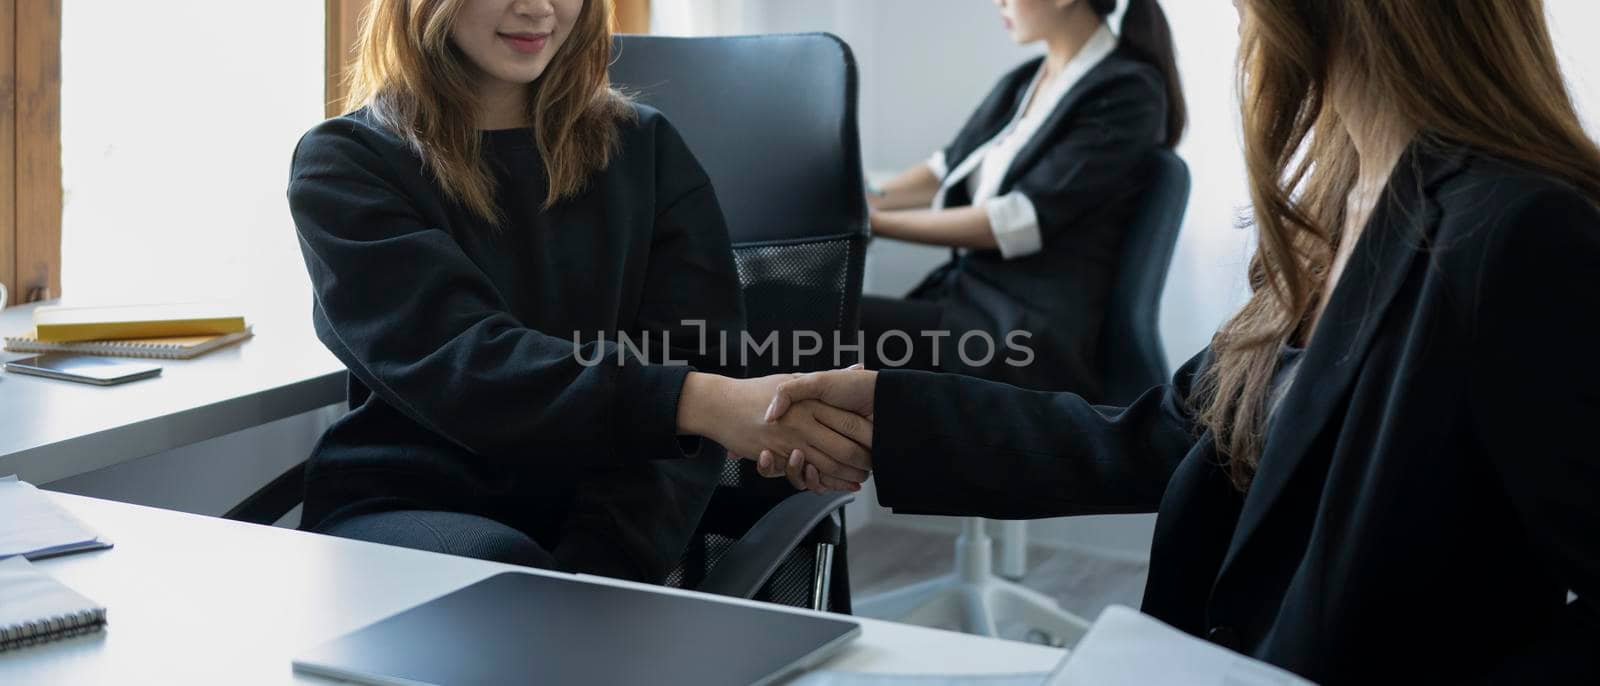 Two sucsessful businesspeople shaking hands after negotiations or finishing up meeting. by prathanchorruangsak